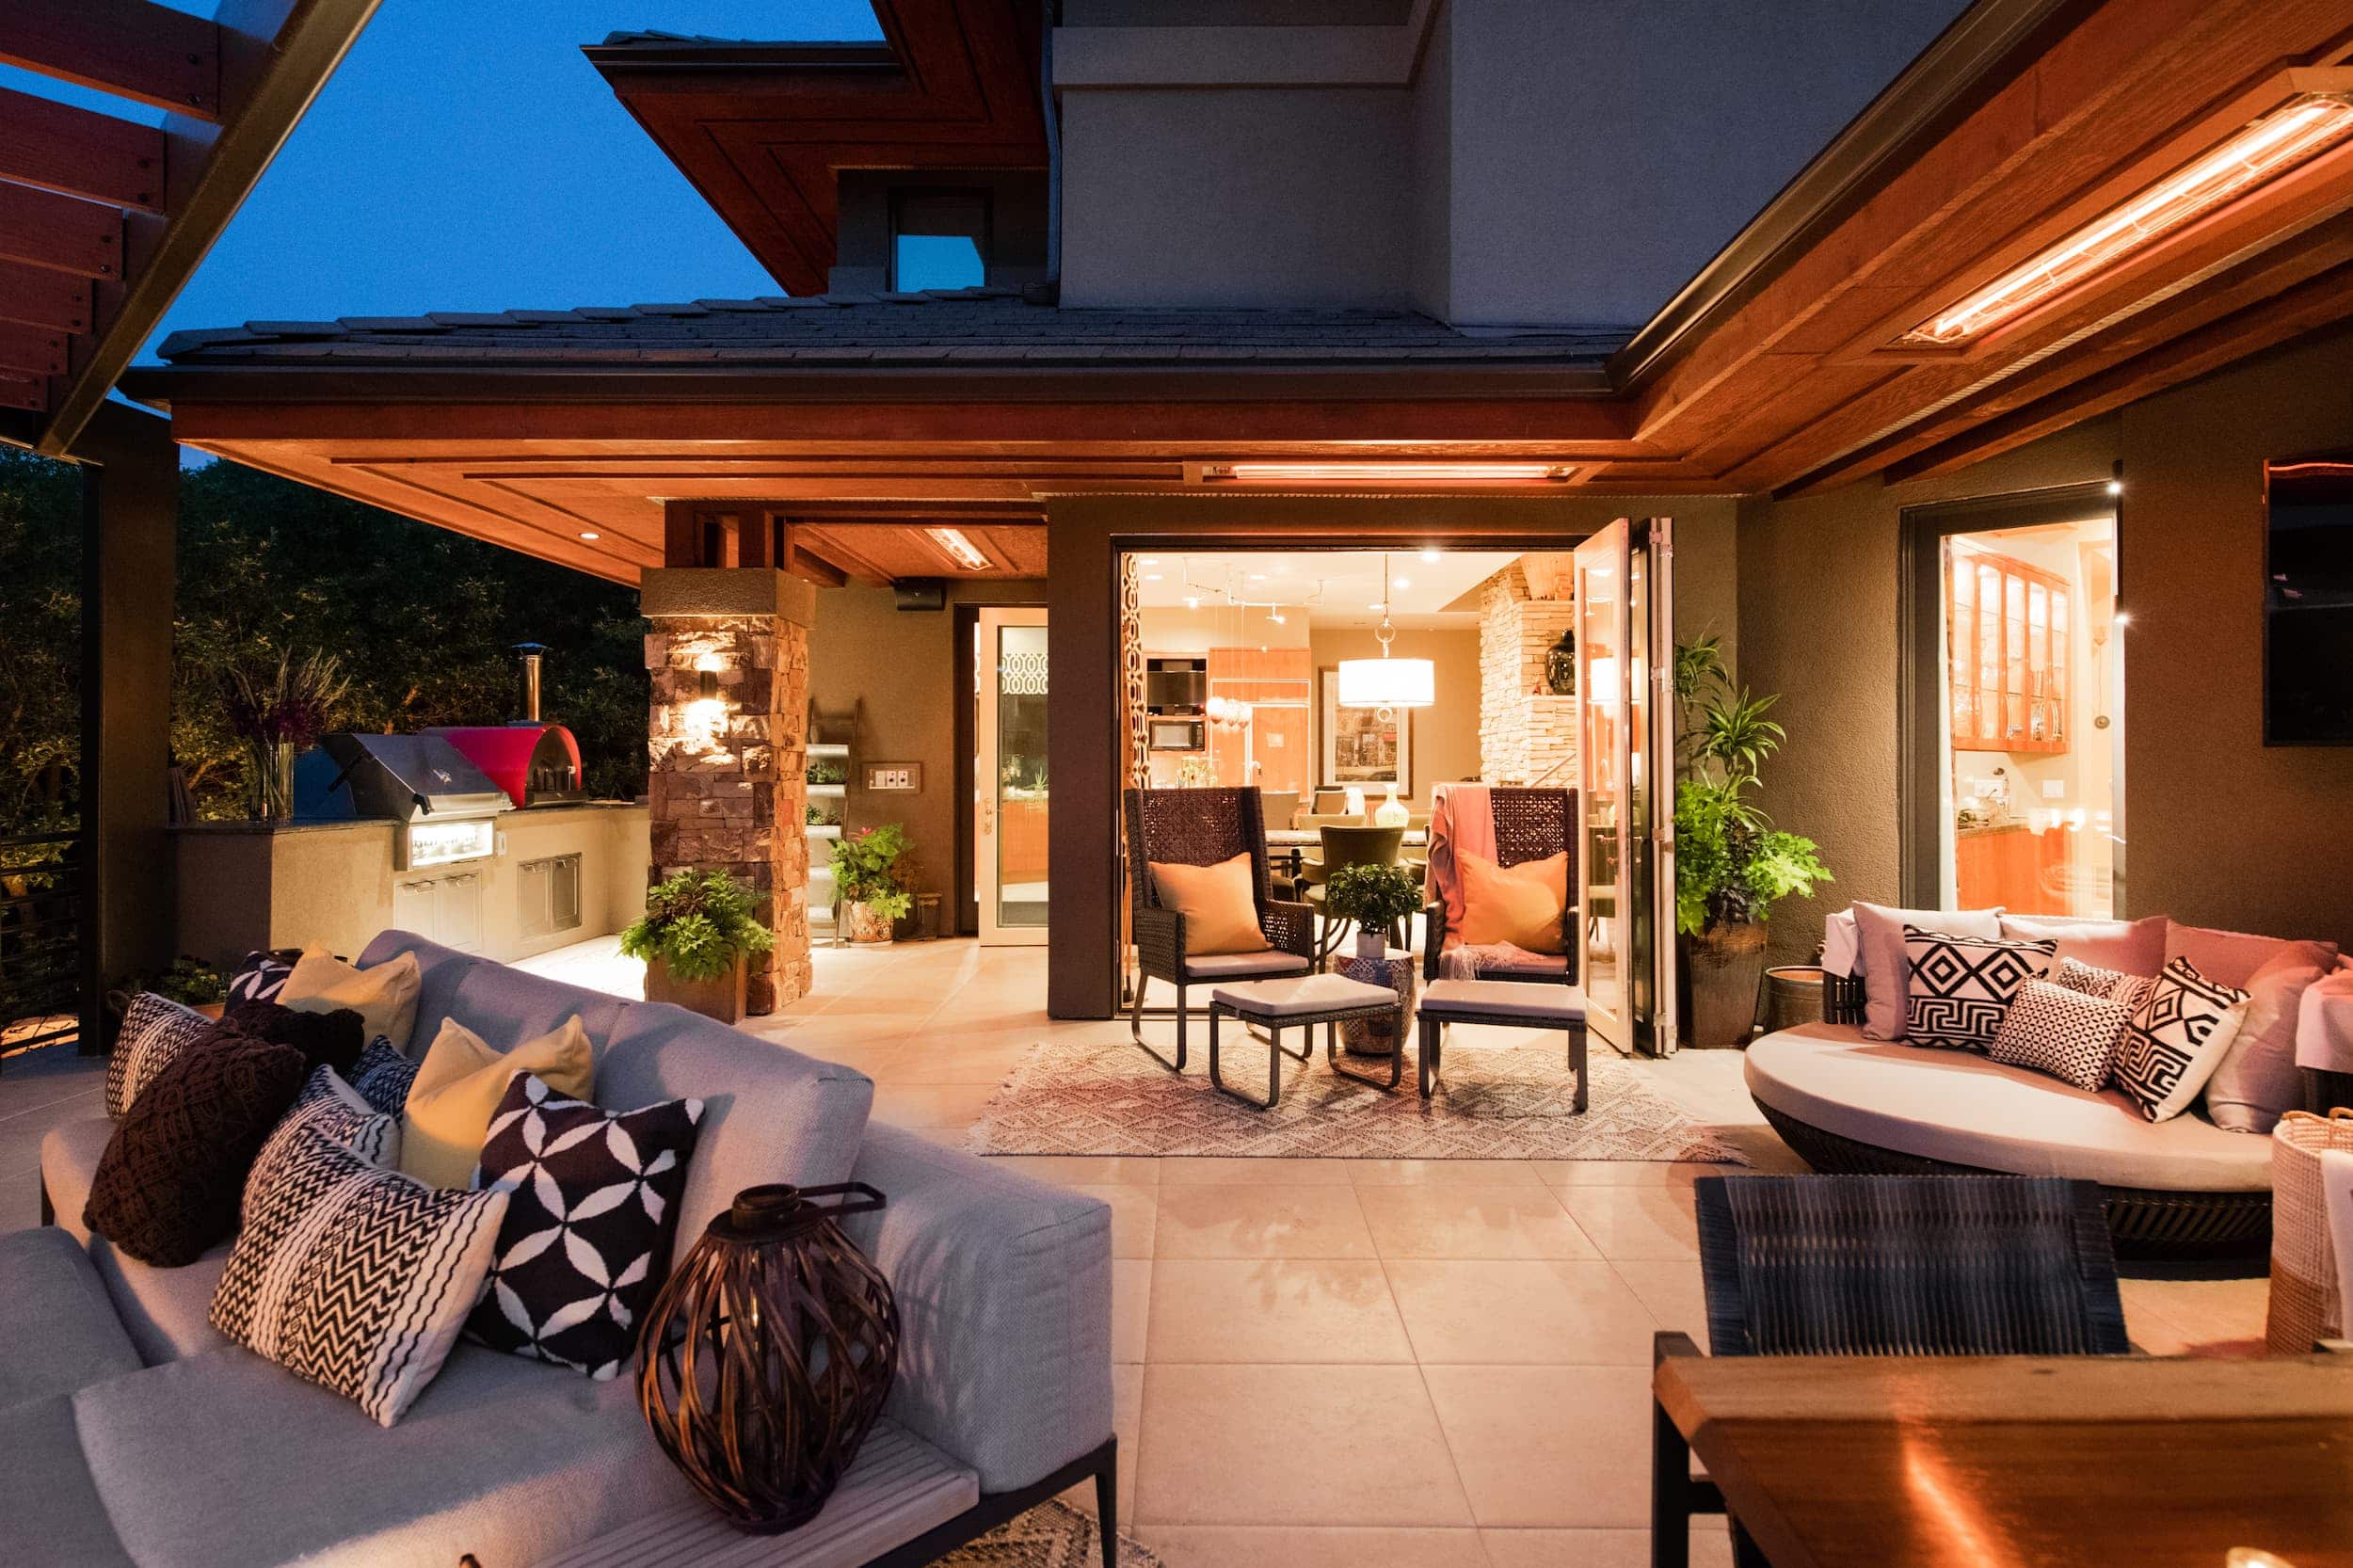 An outdoor living area with furniture and lighting.